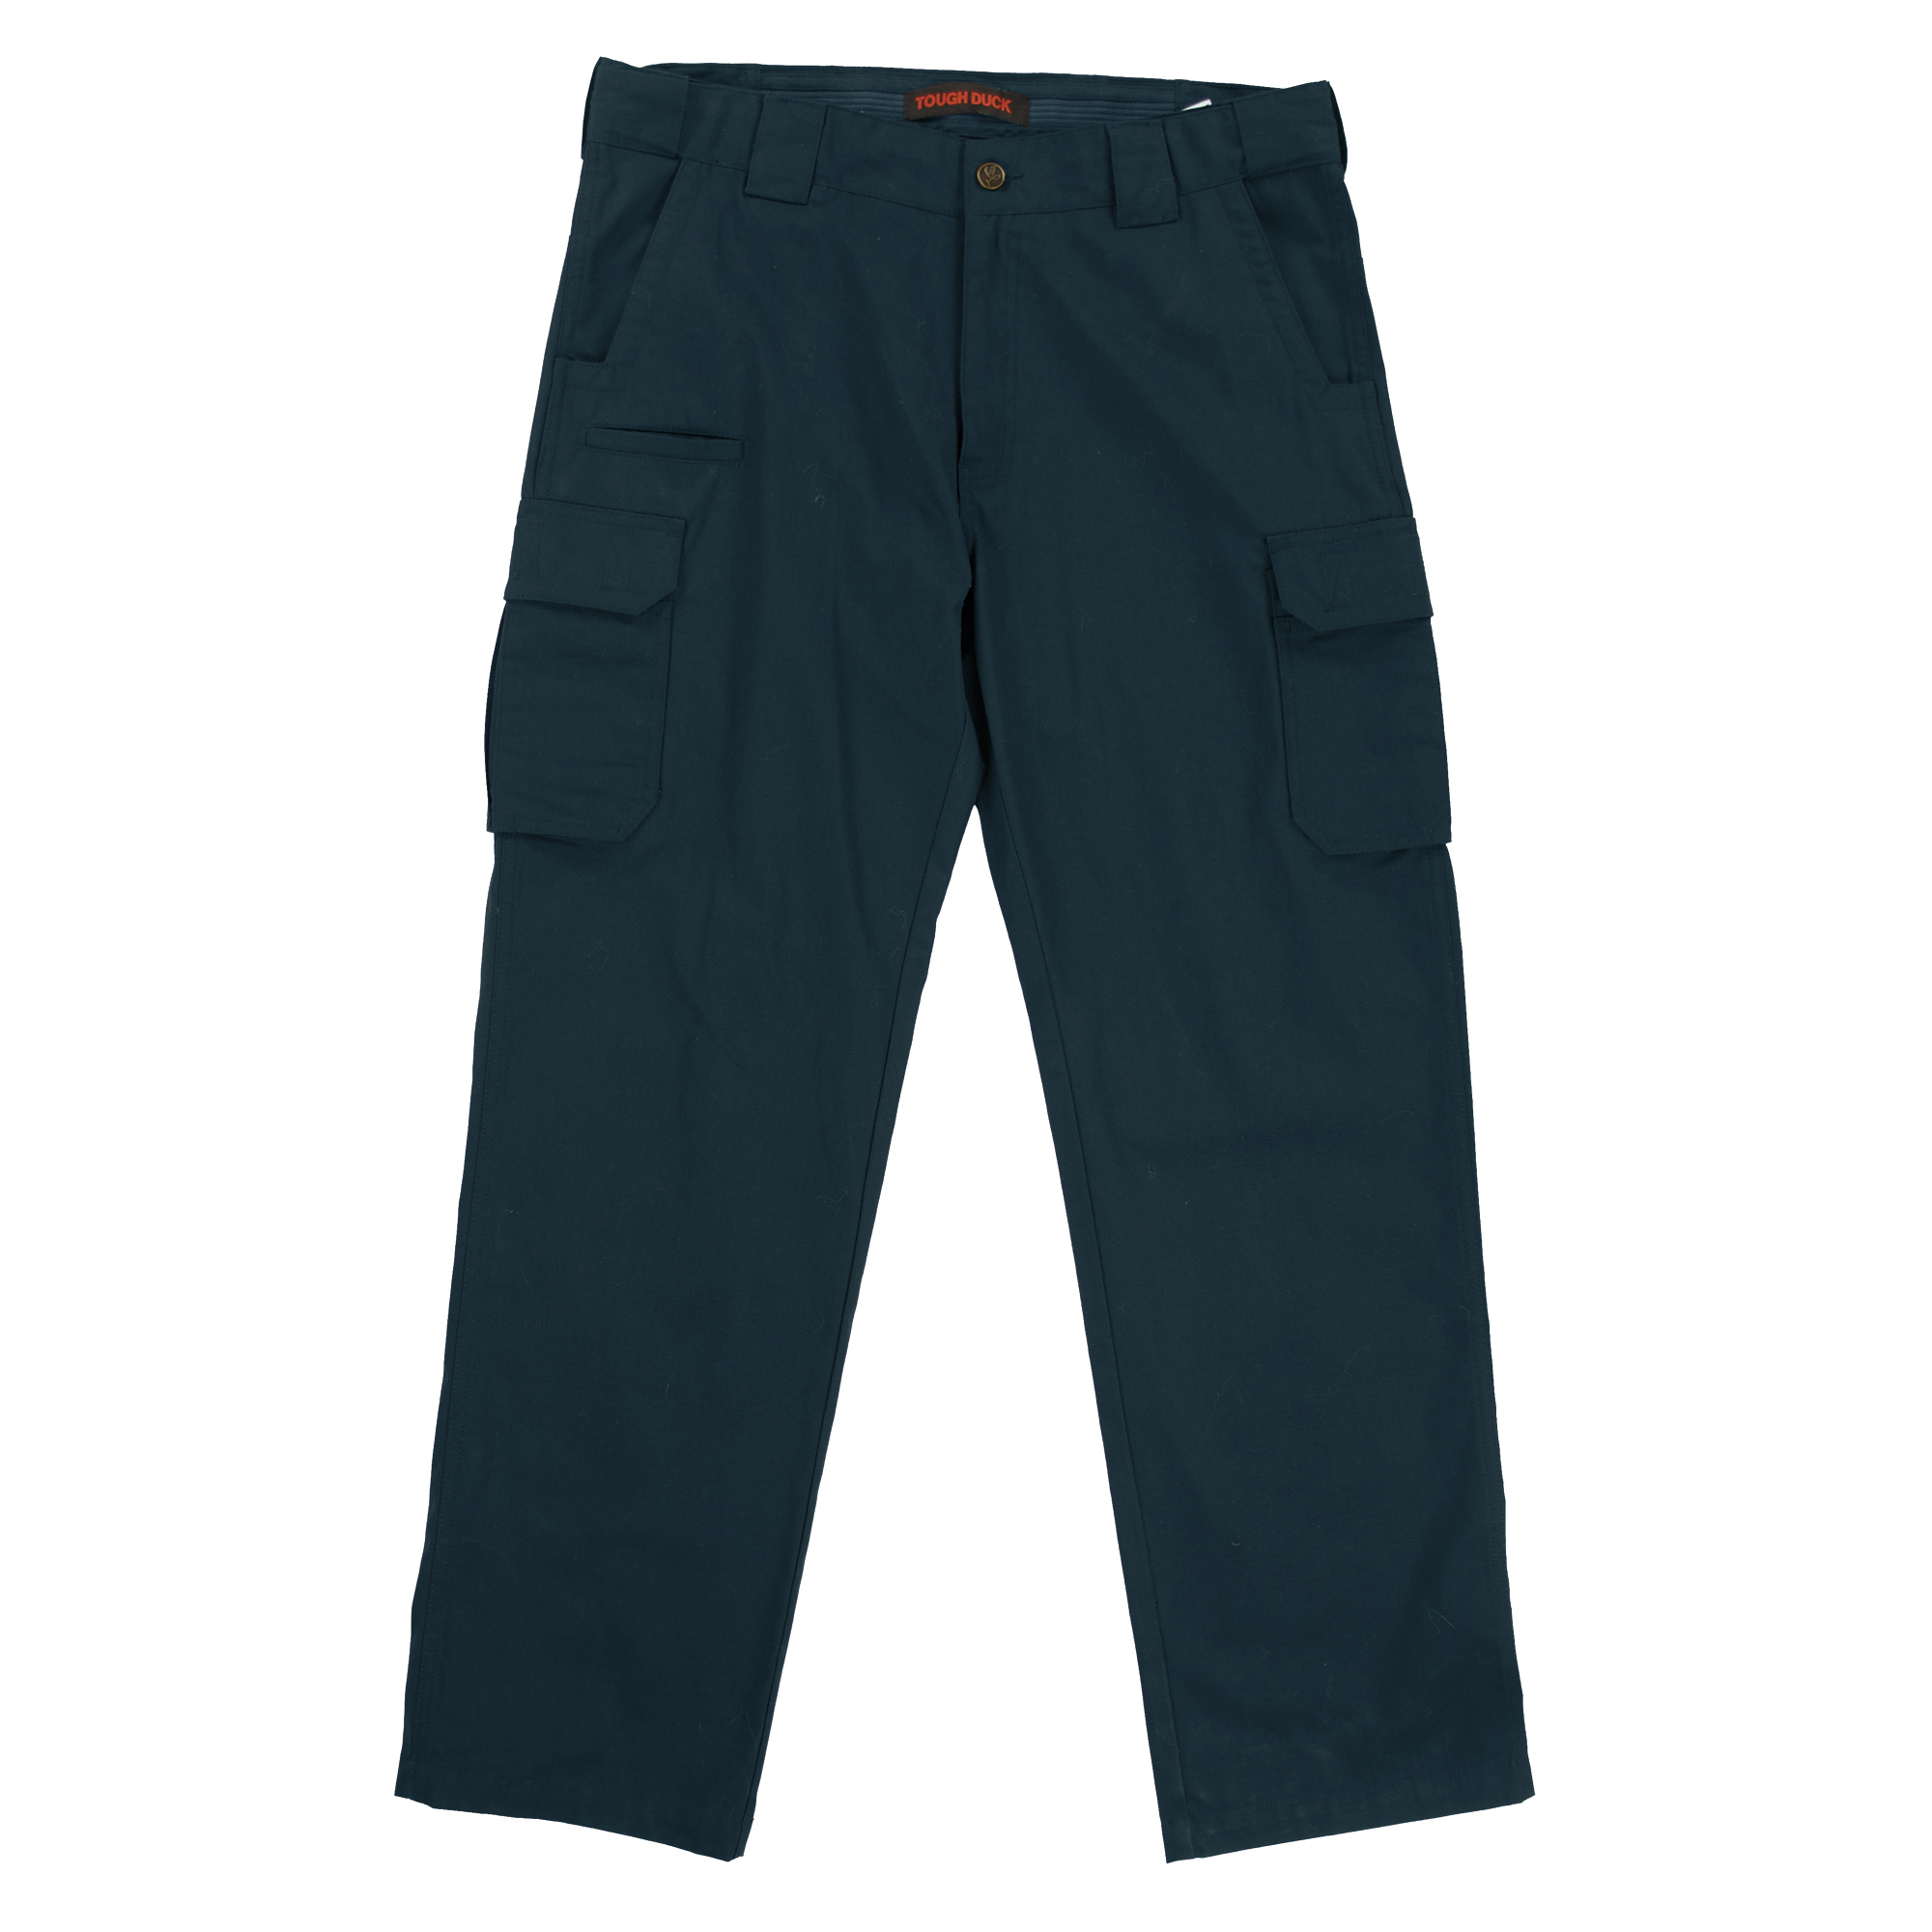 Tough Duck, Ripstop Cargo Pant, Waist 38 in, Inseam 34 in, Color Navy, Model WP113